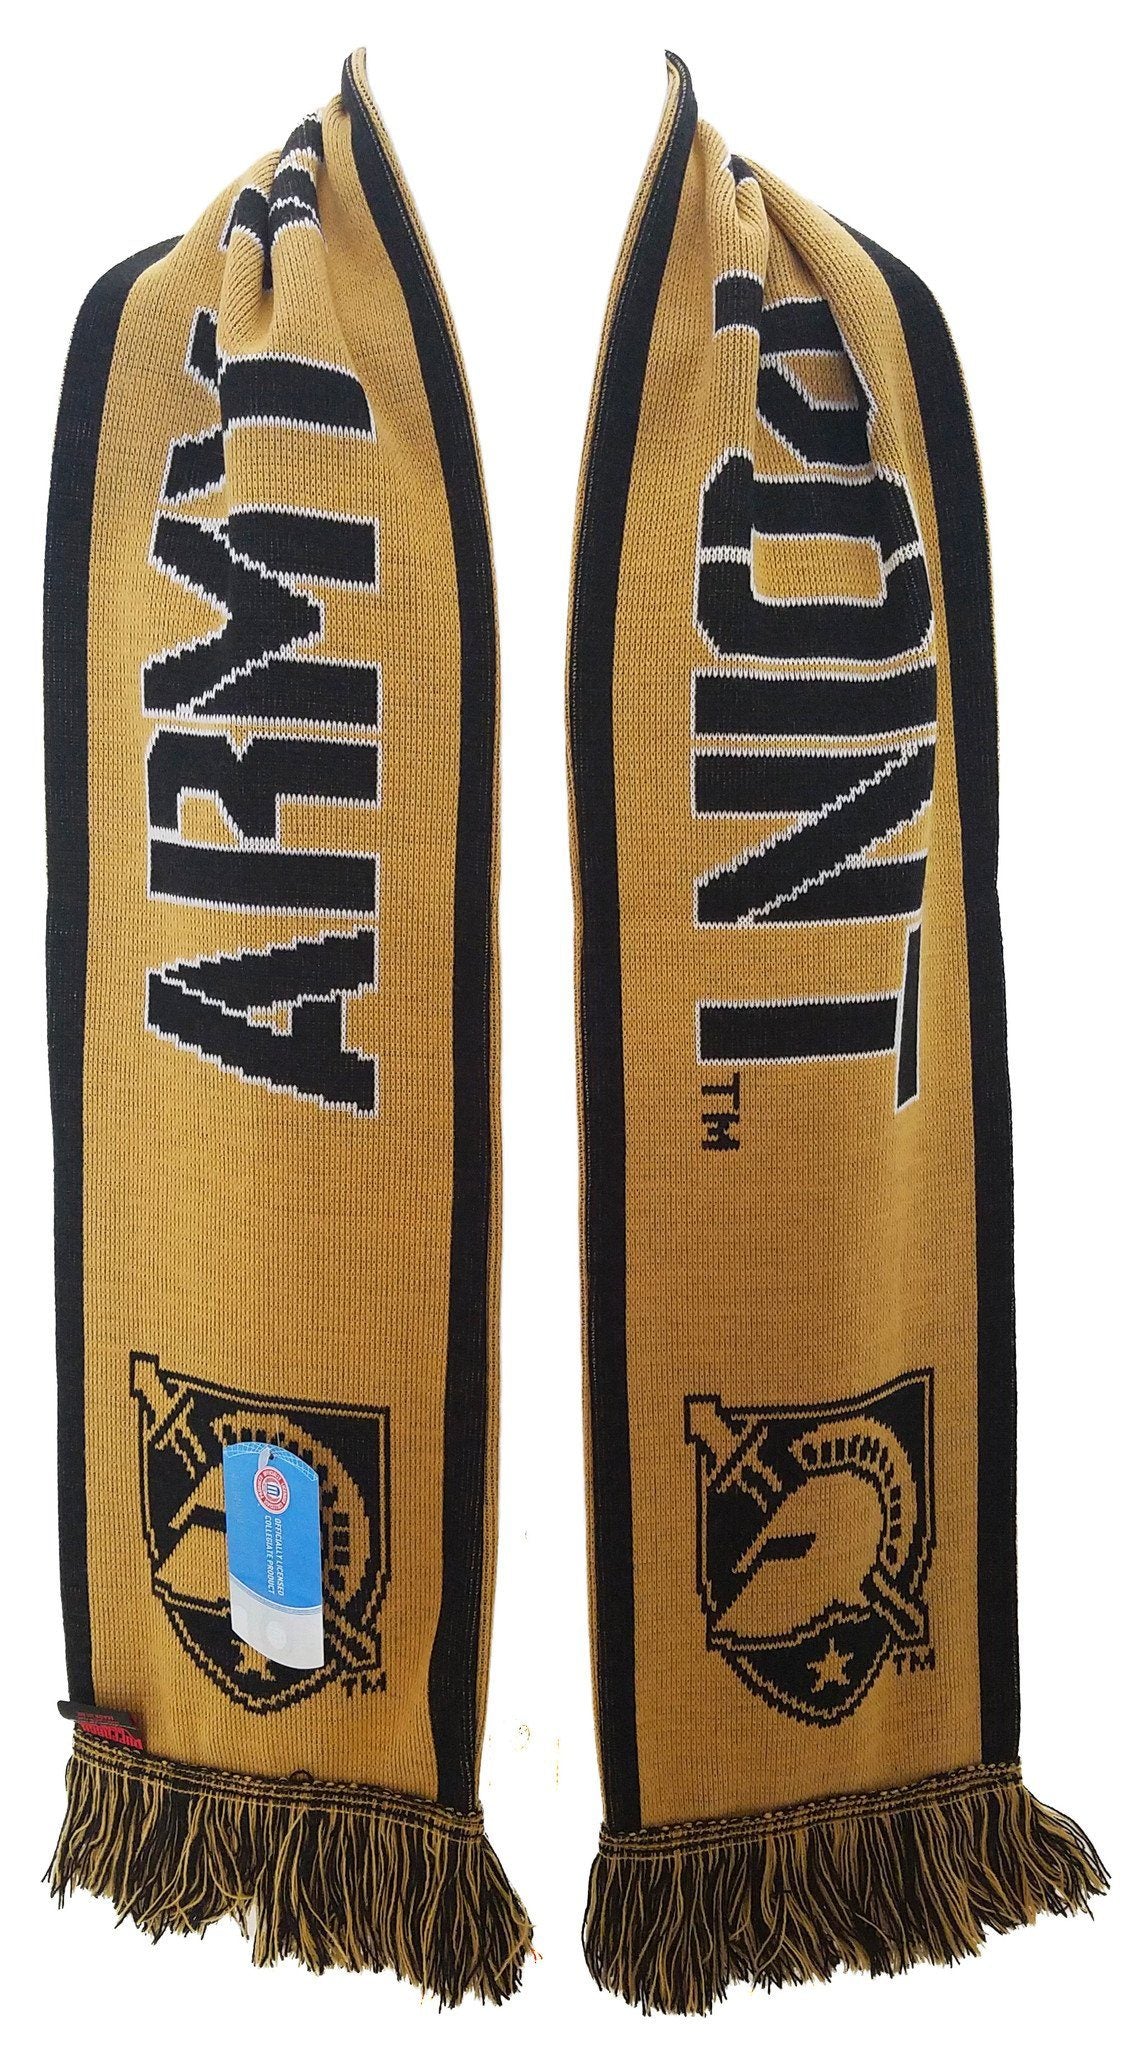 ARMY WEST POINT SCARF - Ruffneck Scarves - 2